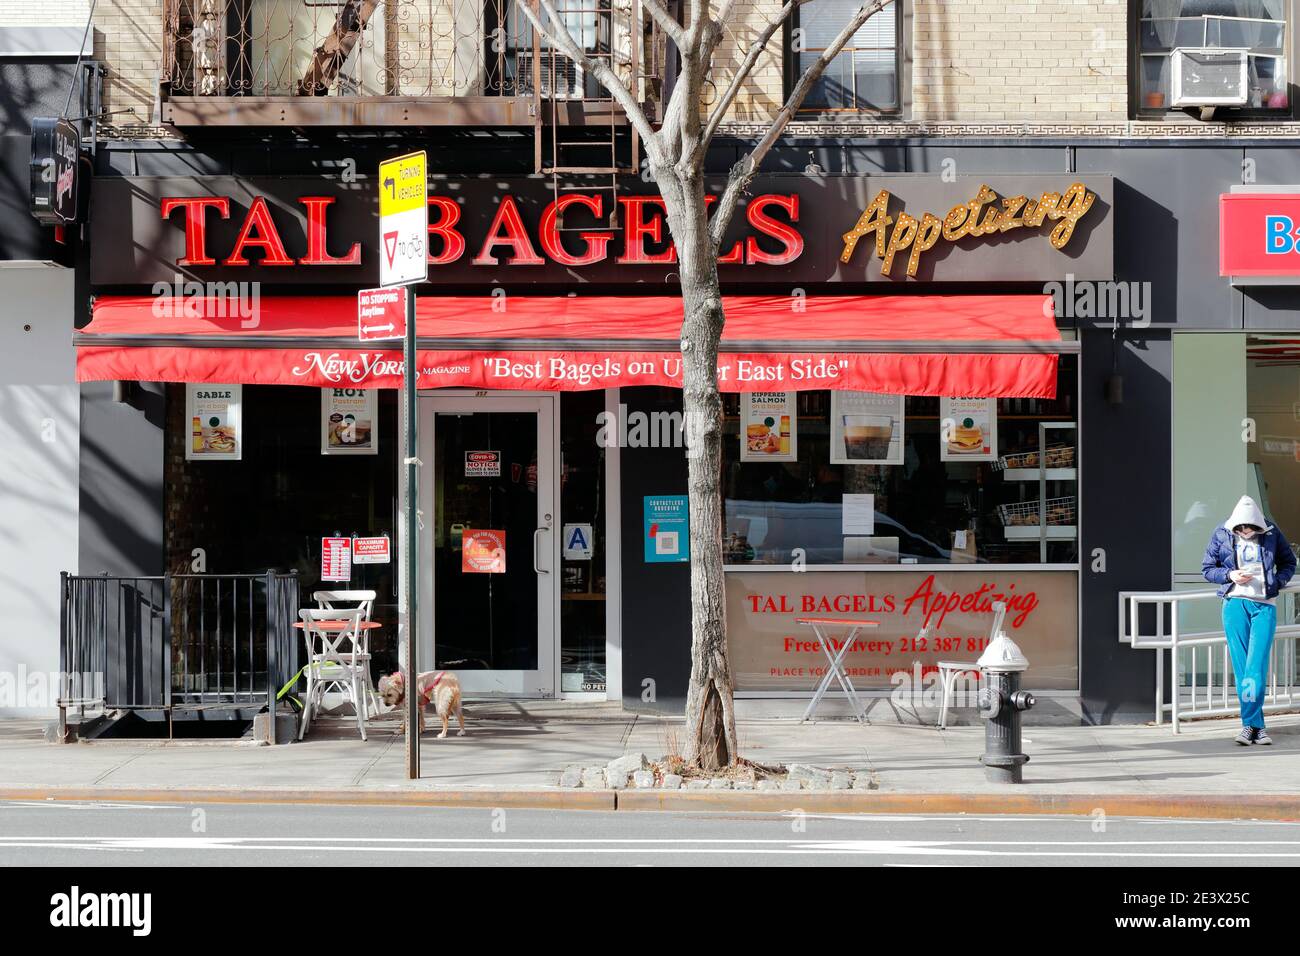 Tal Bagels, 357 First Ave, New York, NYC storefront photo of a bagel shop in the Gramercy neighborhood of Manhattan. Stock Photo